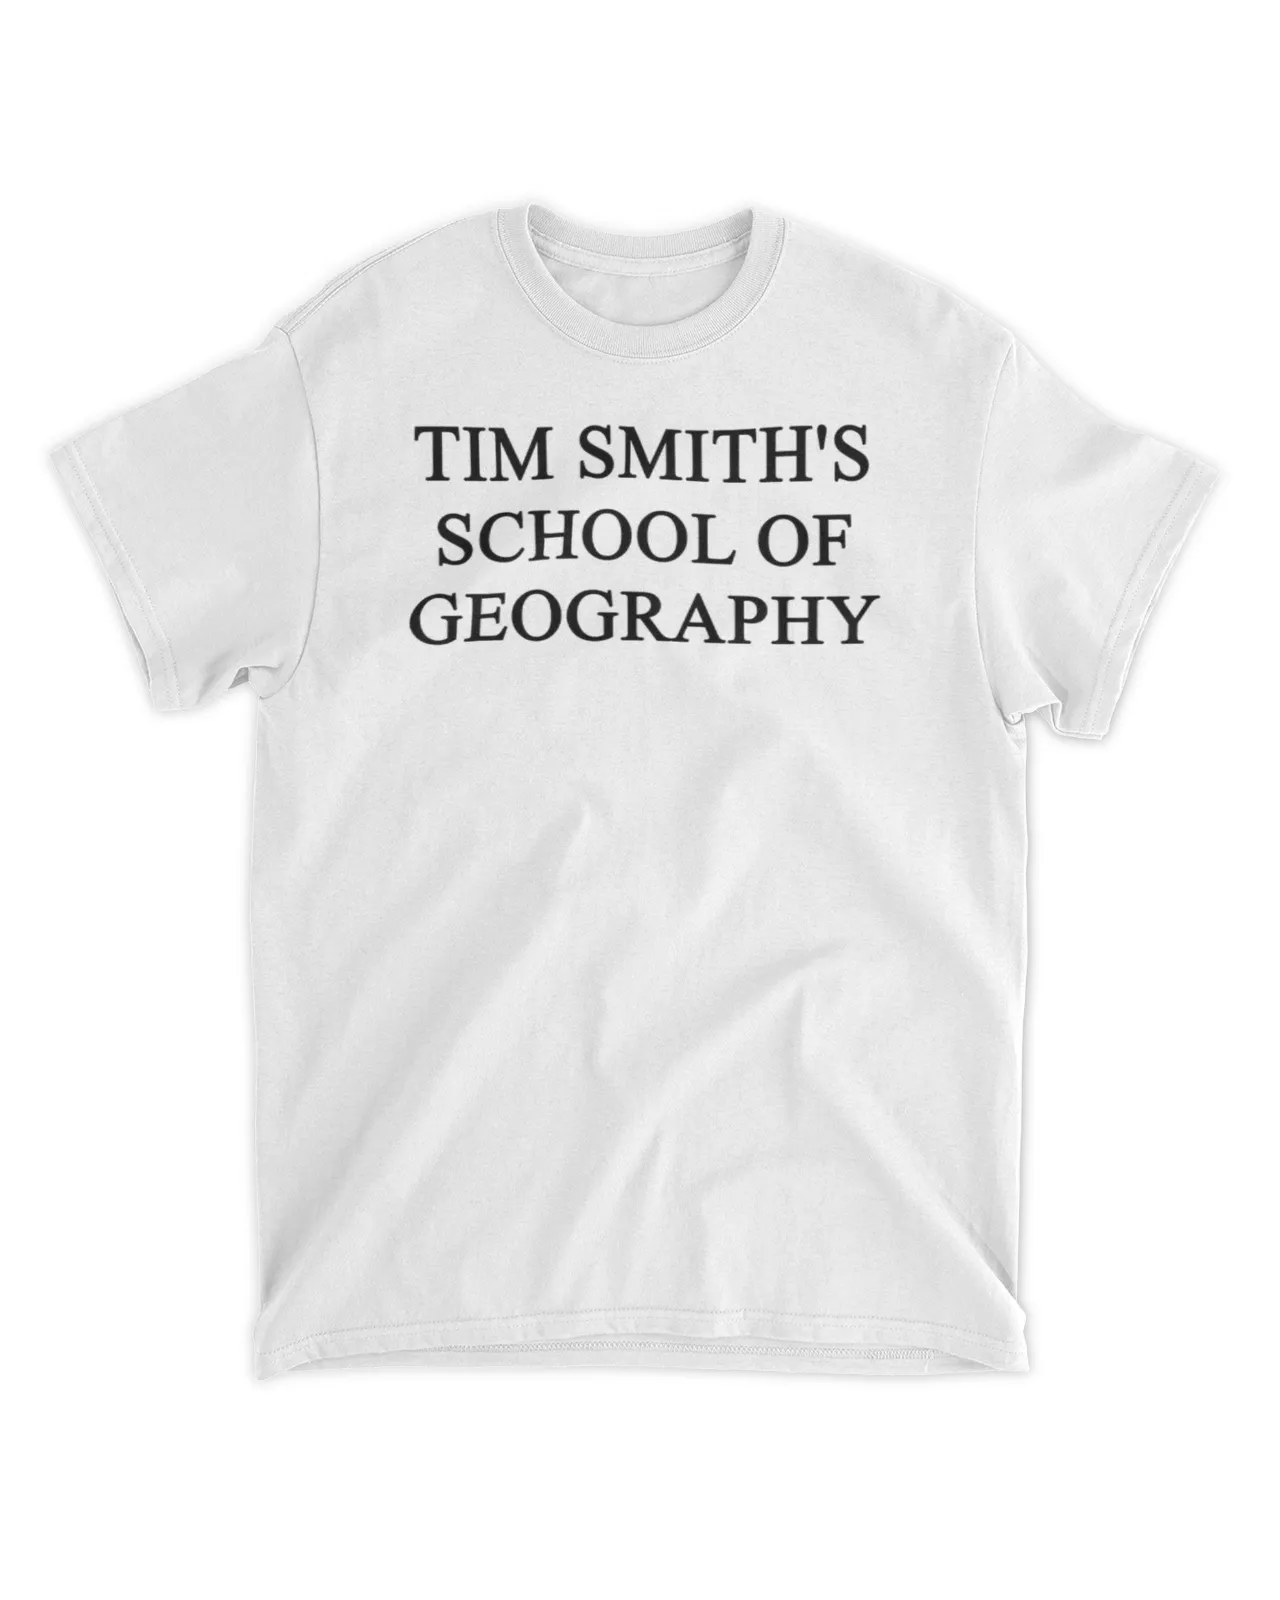  Tim Smith's school of geography shirt